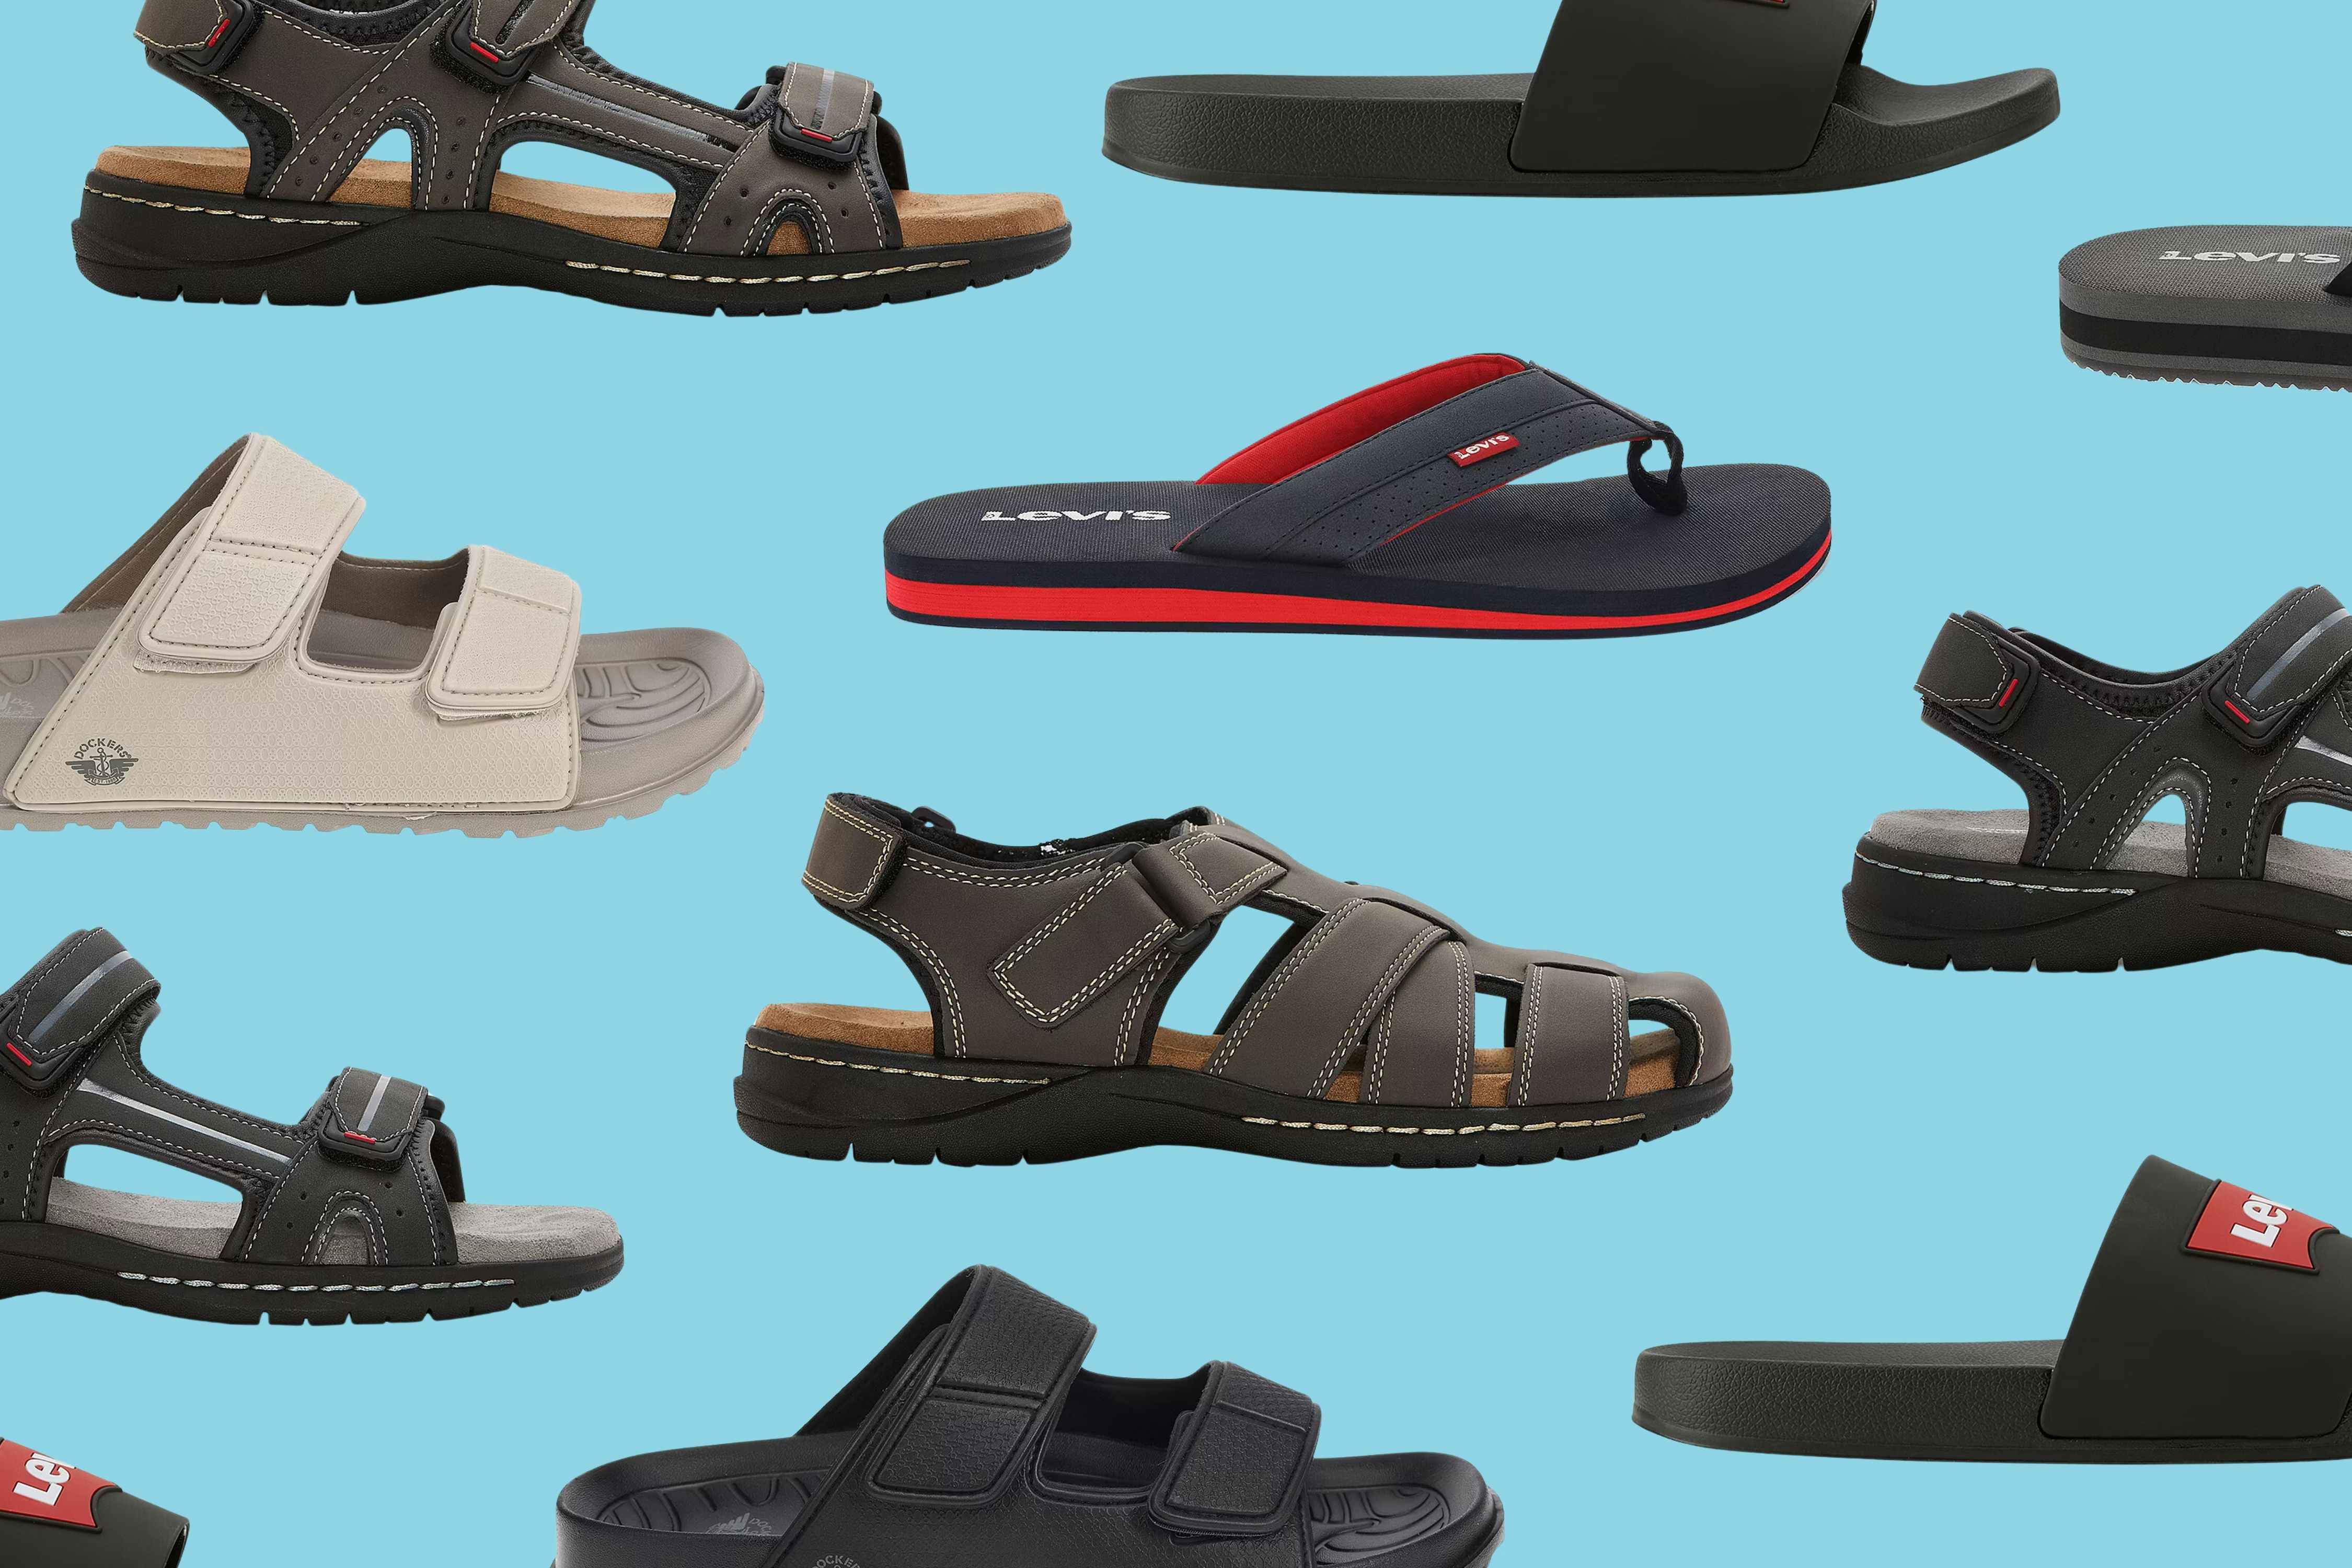 Doorbuster Deals for Father's Day — Men's Sandals, as Low as $13 at JCPenney